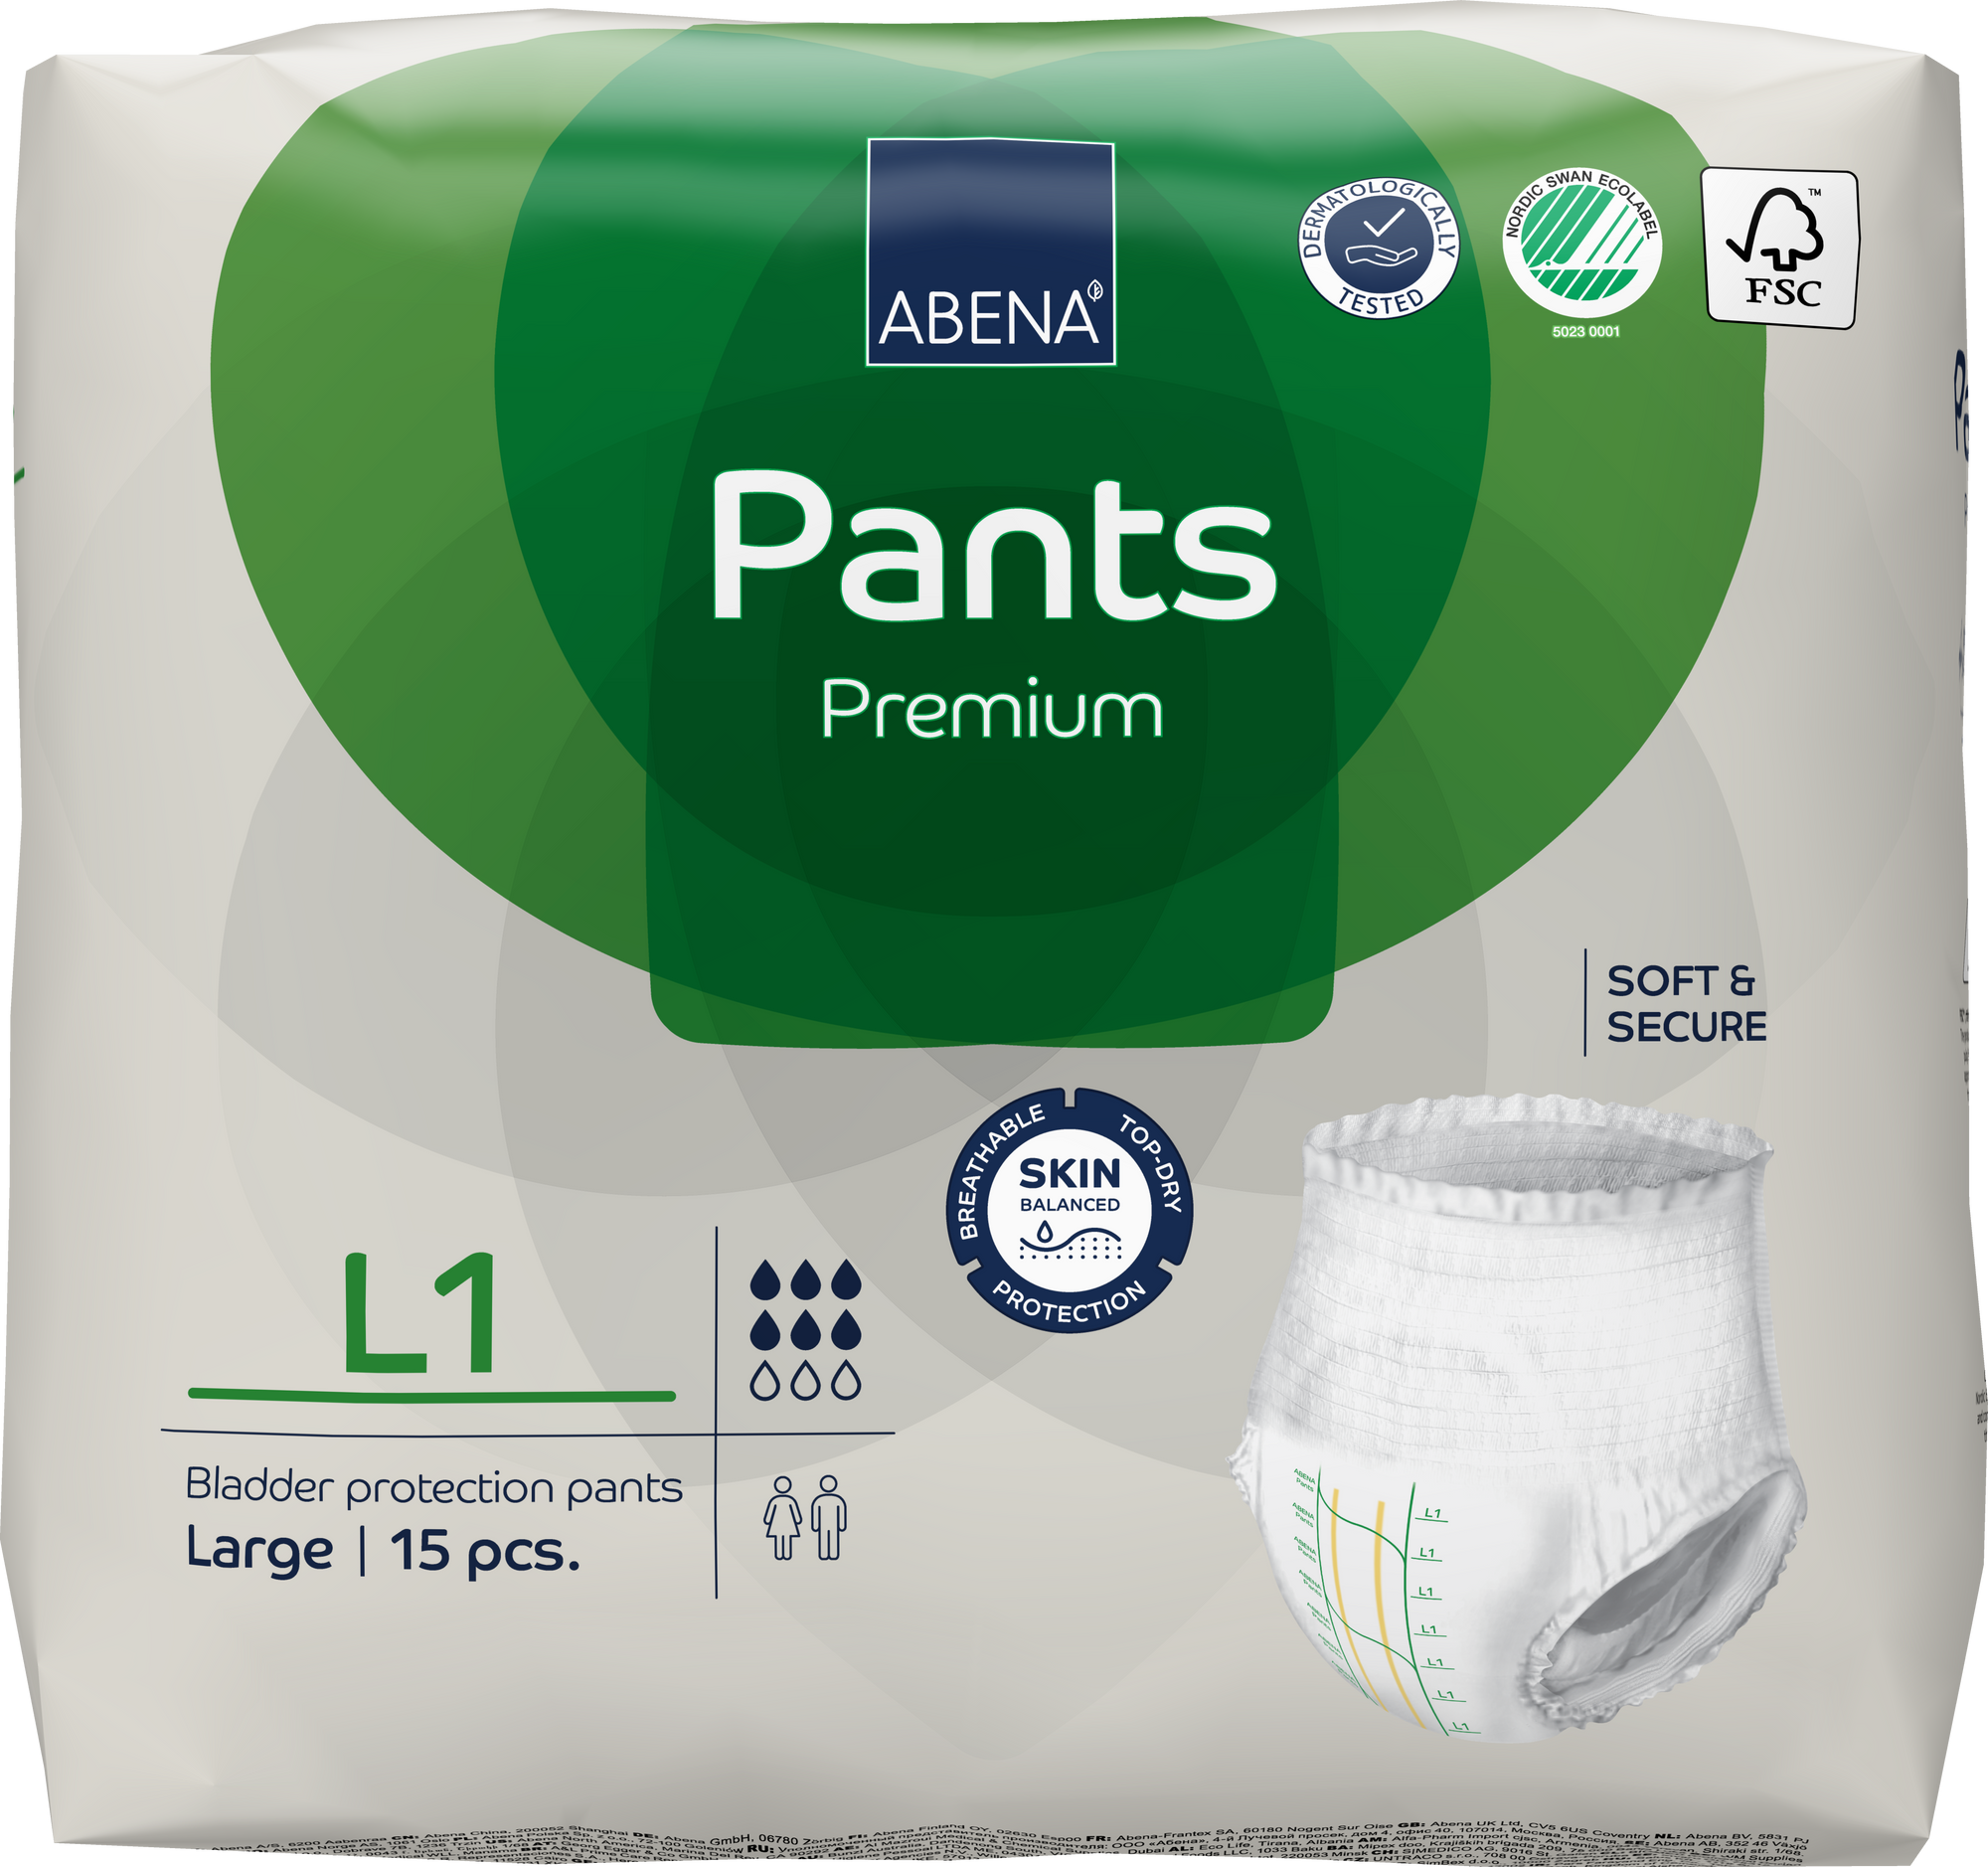 Comfy Life Premium Adult Incontinence Pull Up Diaper Pants 12 Pack High  Absorbency (Small)